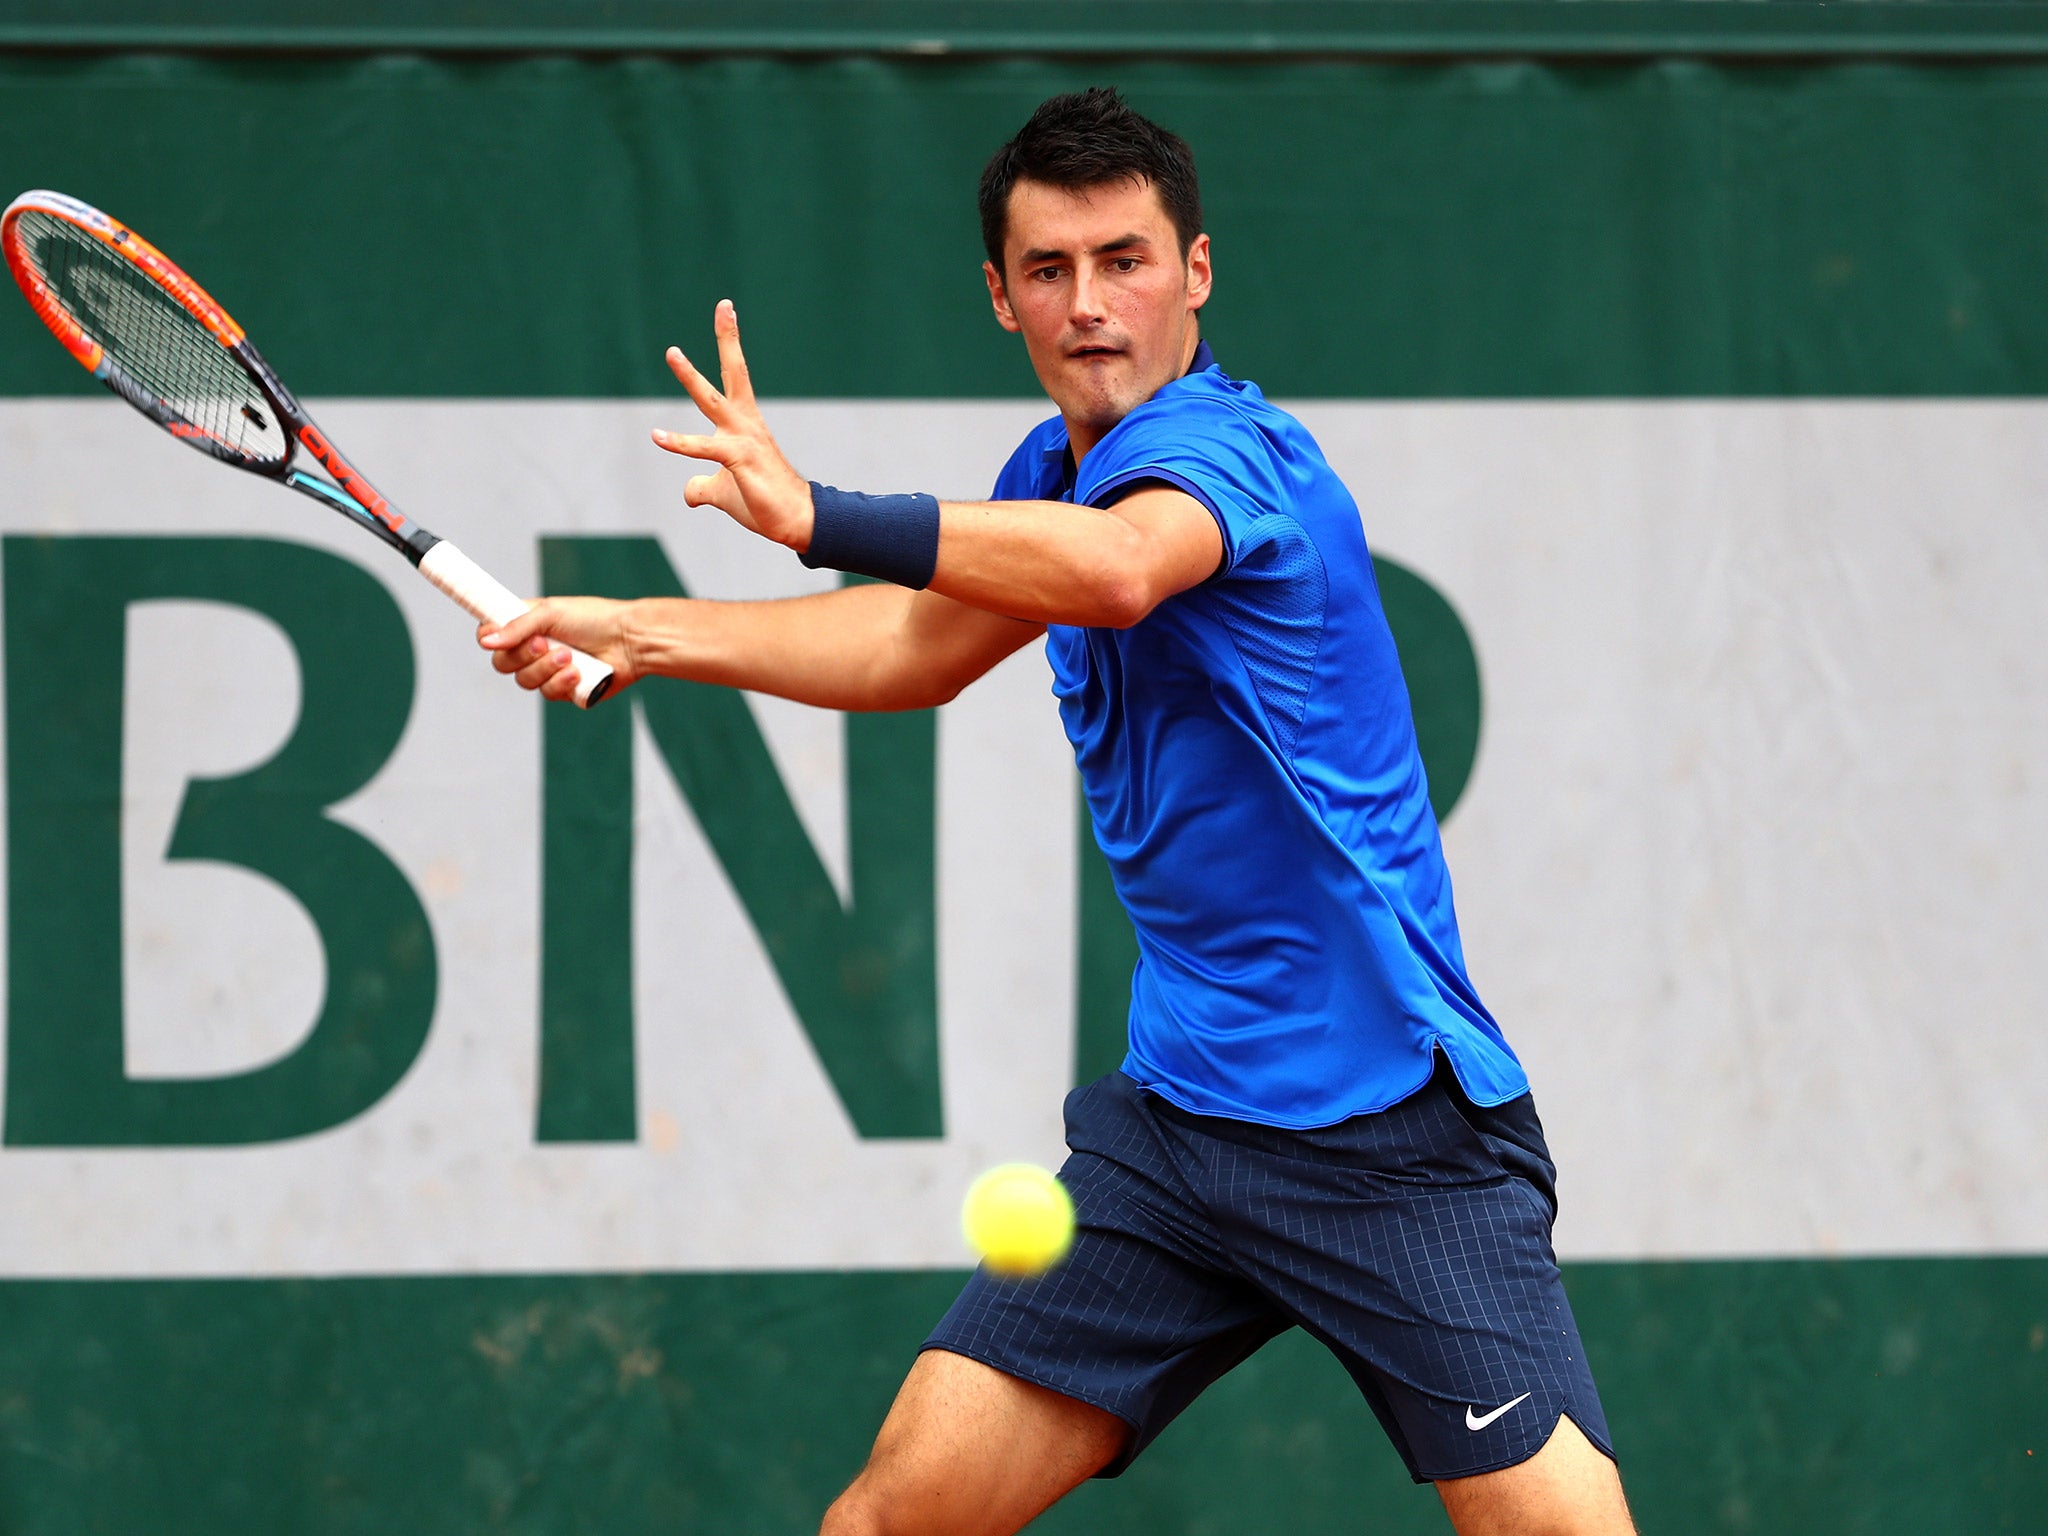 Tomic has drawn sharp criticism for his behaviour